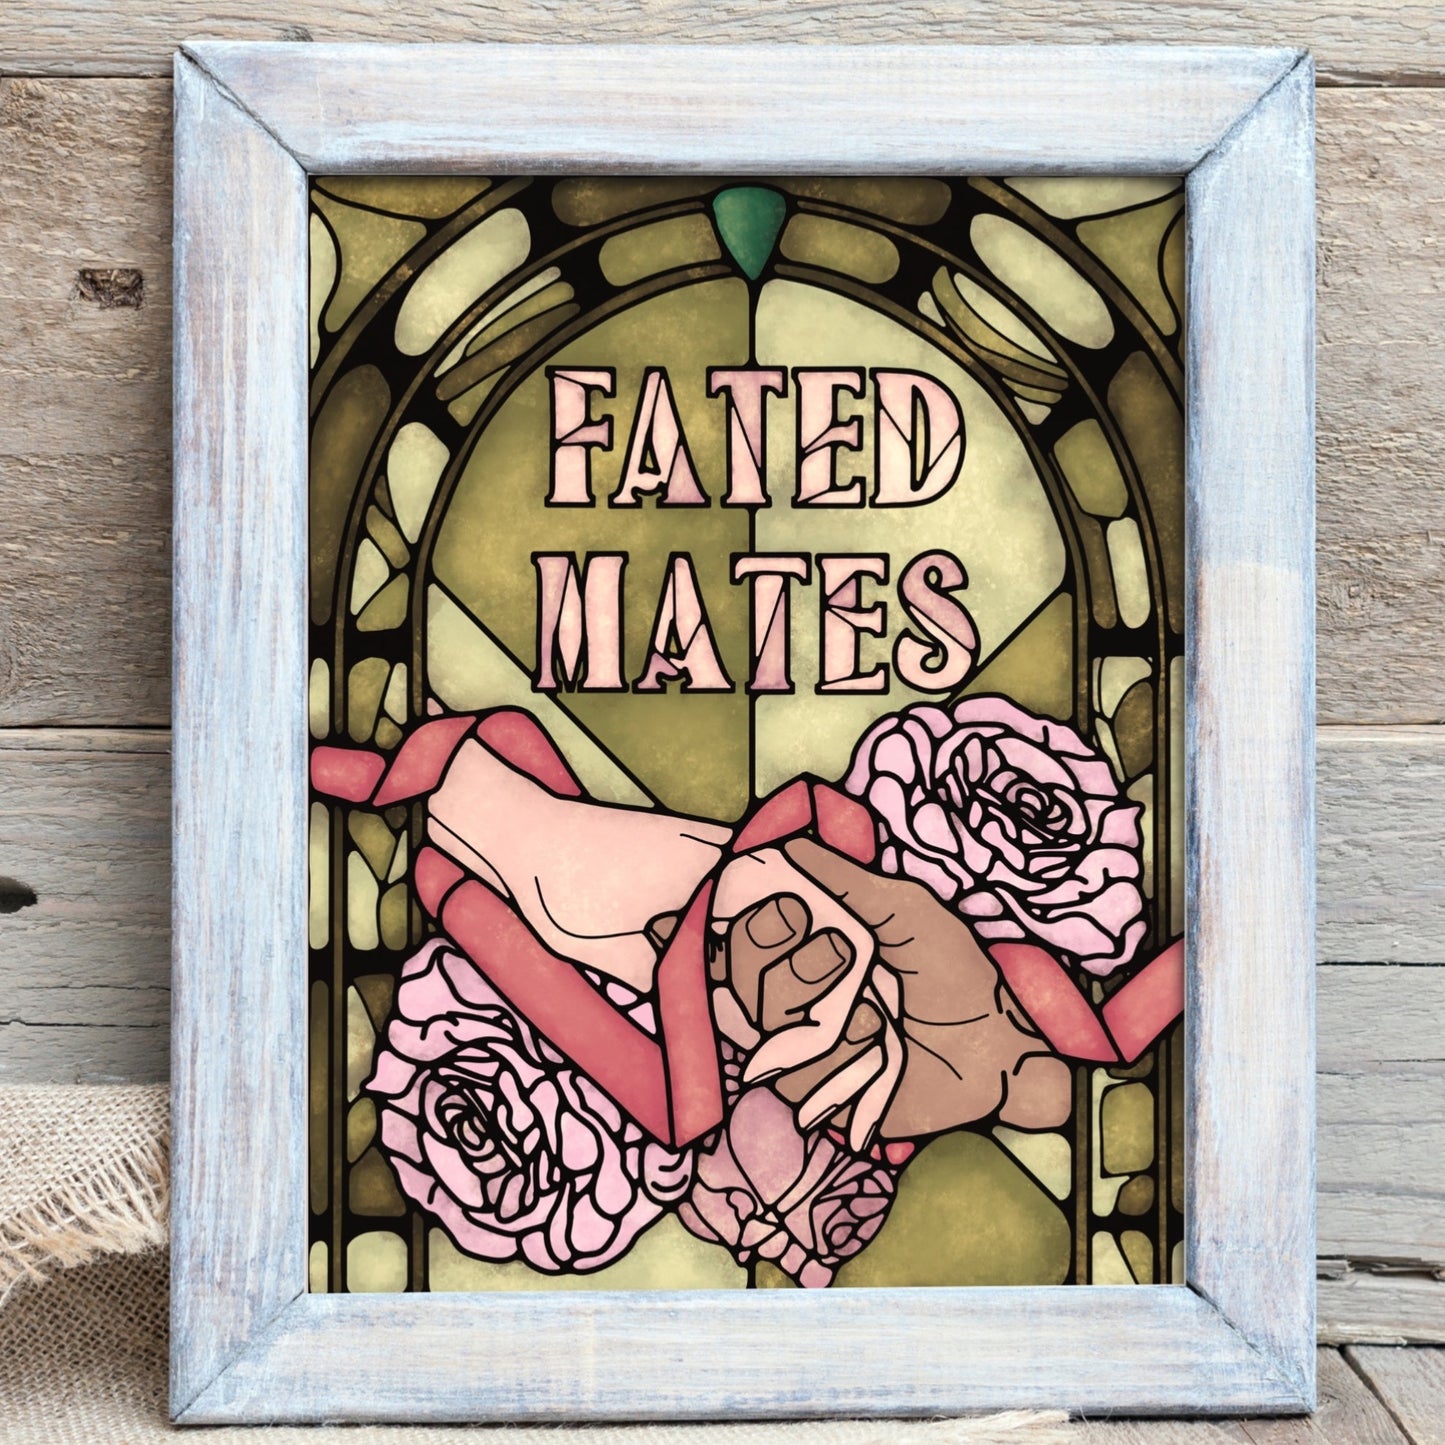 Book Tropes Fated Mates Poster - Bookish Wall Art Stained Glass Style Wall Decor